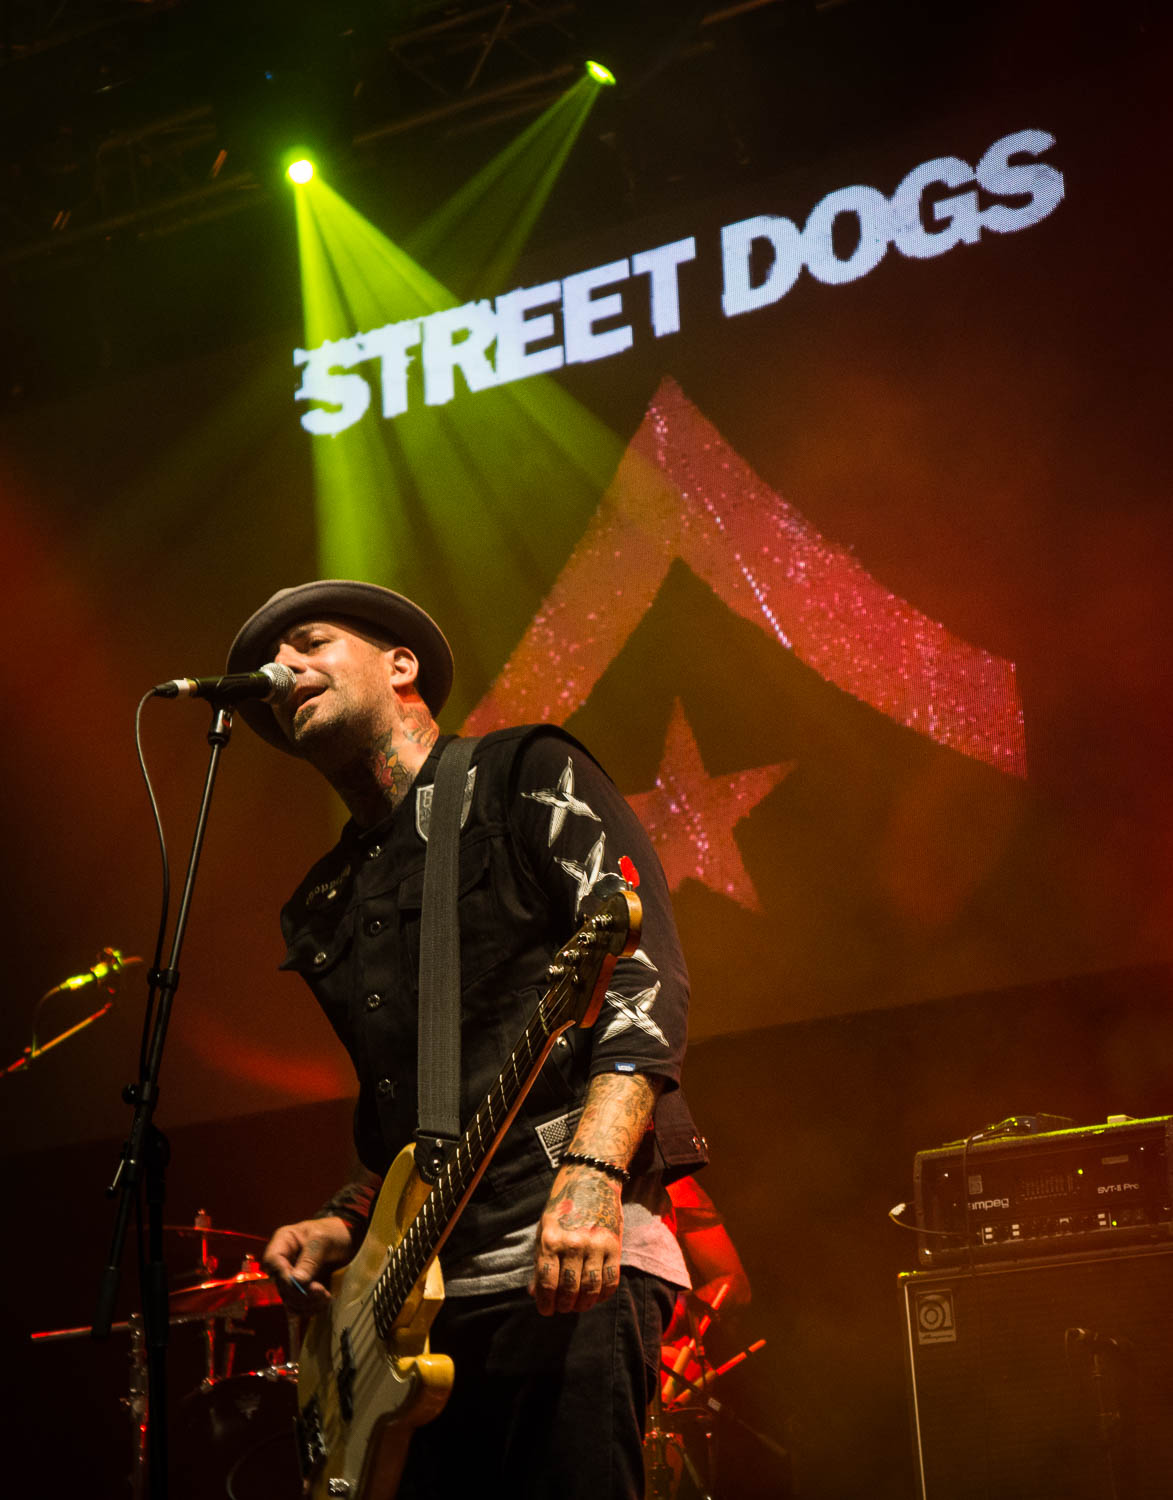 Johnny Rioux of The Street Dogs